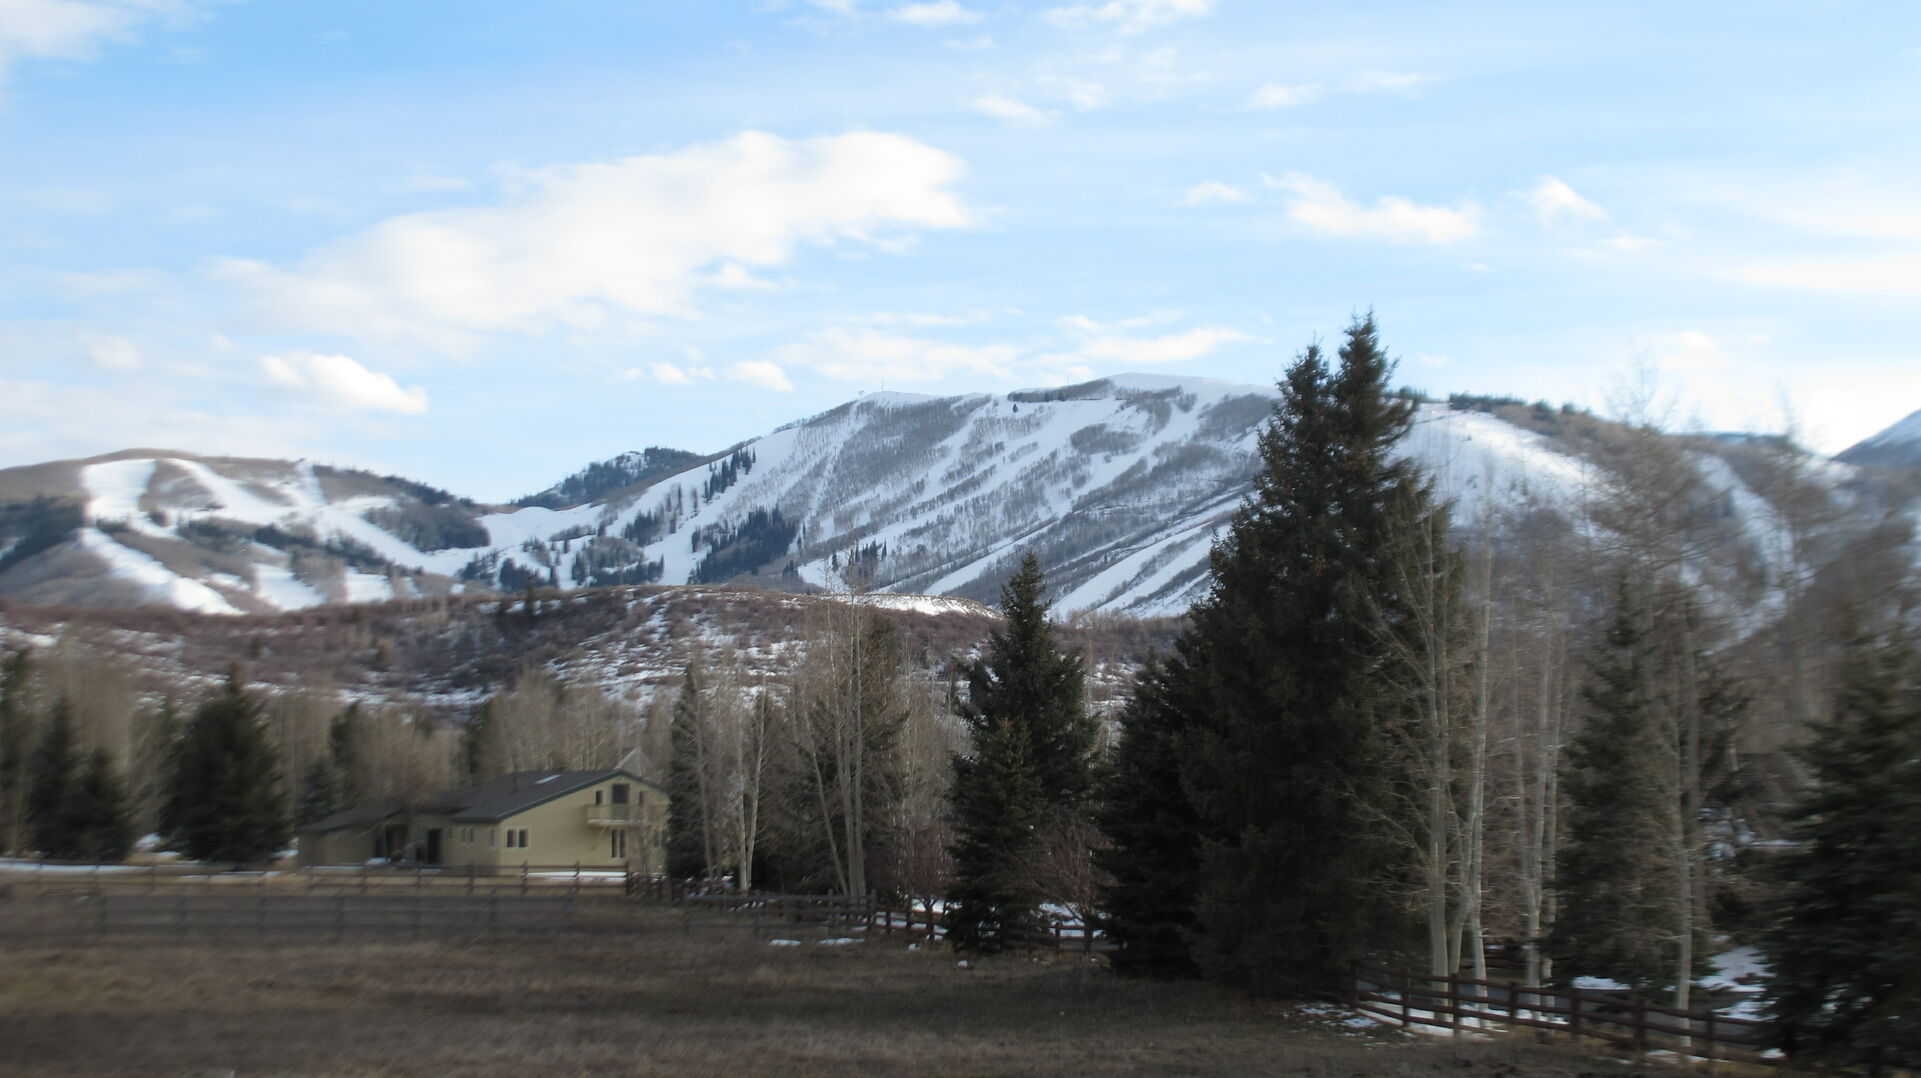 View in spring, never a bad time of year and always something to do. Hike, Bike, Ski, Relax, Hot air ballooning, Horseback